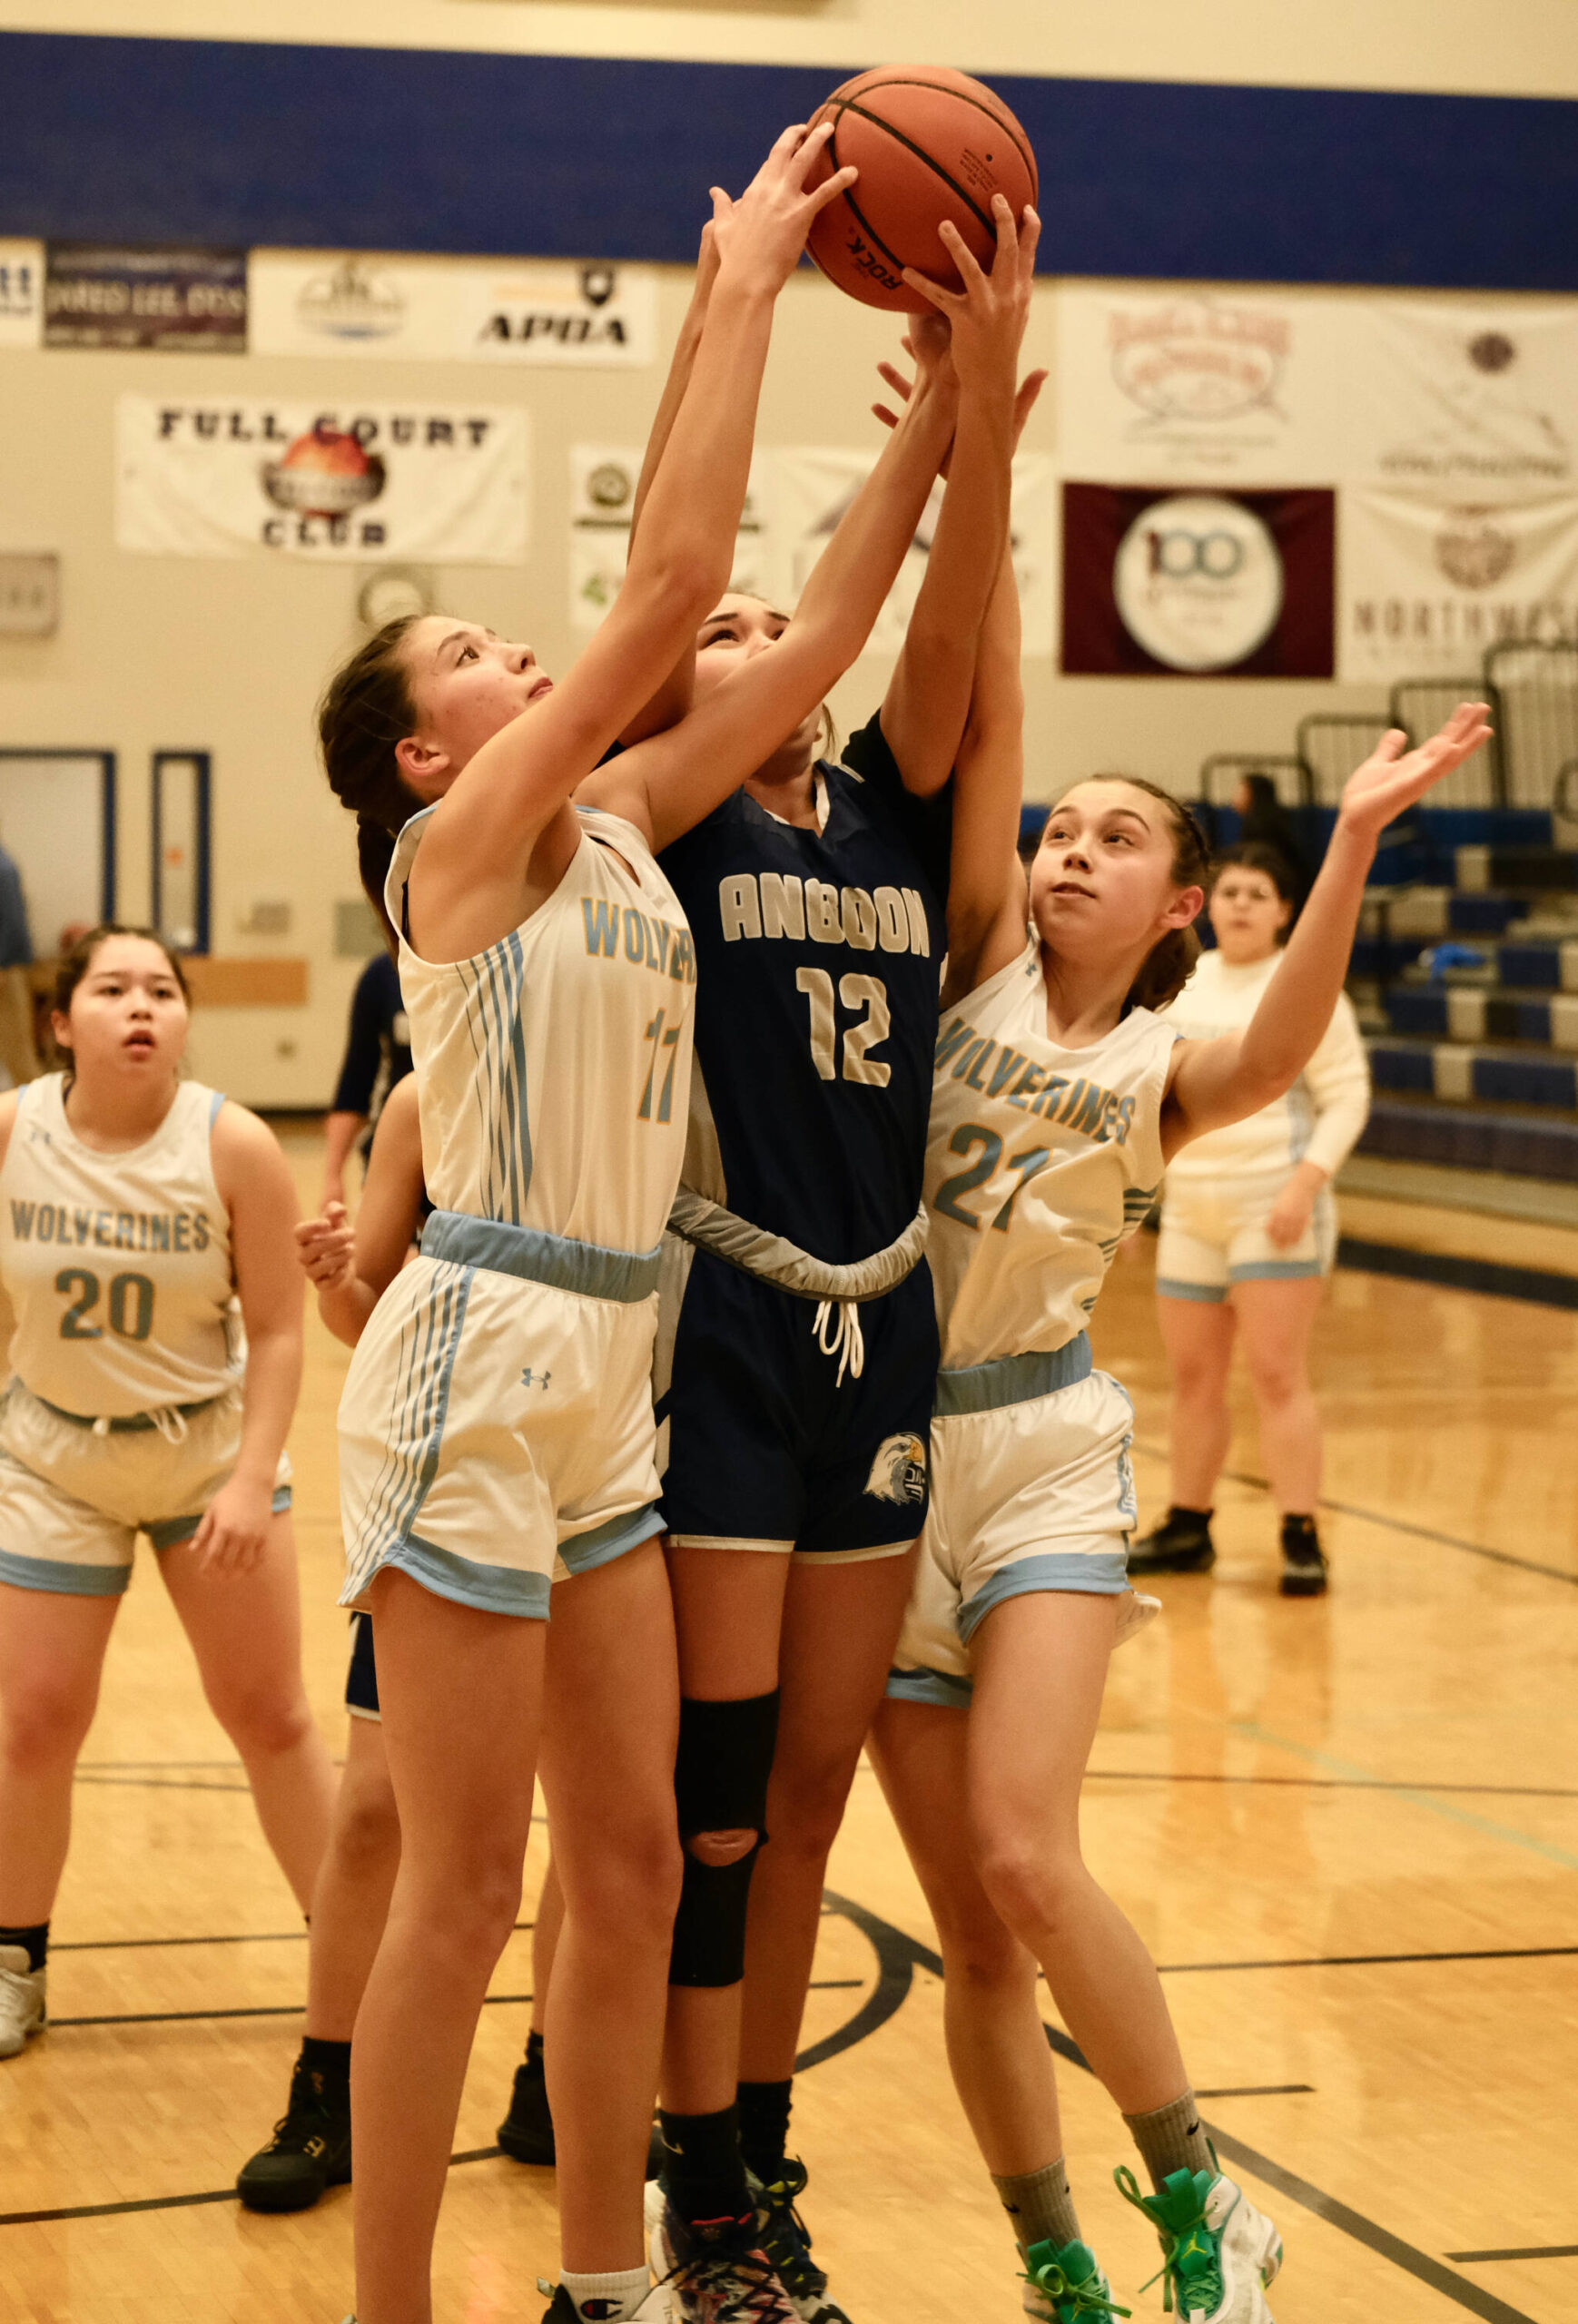 Dillingham’s Kalin Clouse (11), Angoon’s Lisa Kookesh (12) and Dillingham’s Lanny Woods (21) battle for a rebound during the Elizabeth Peratrovich Women’s High School Basketball Invitational Tournament on Thursday at Thunder Mountain High School. The tournament runs through Saturday. (Klas Stolpe / For the Juneau Empire)